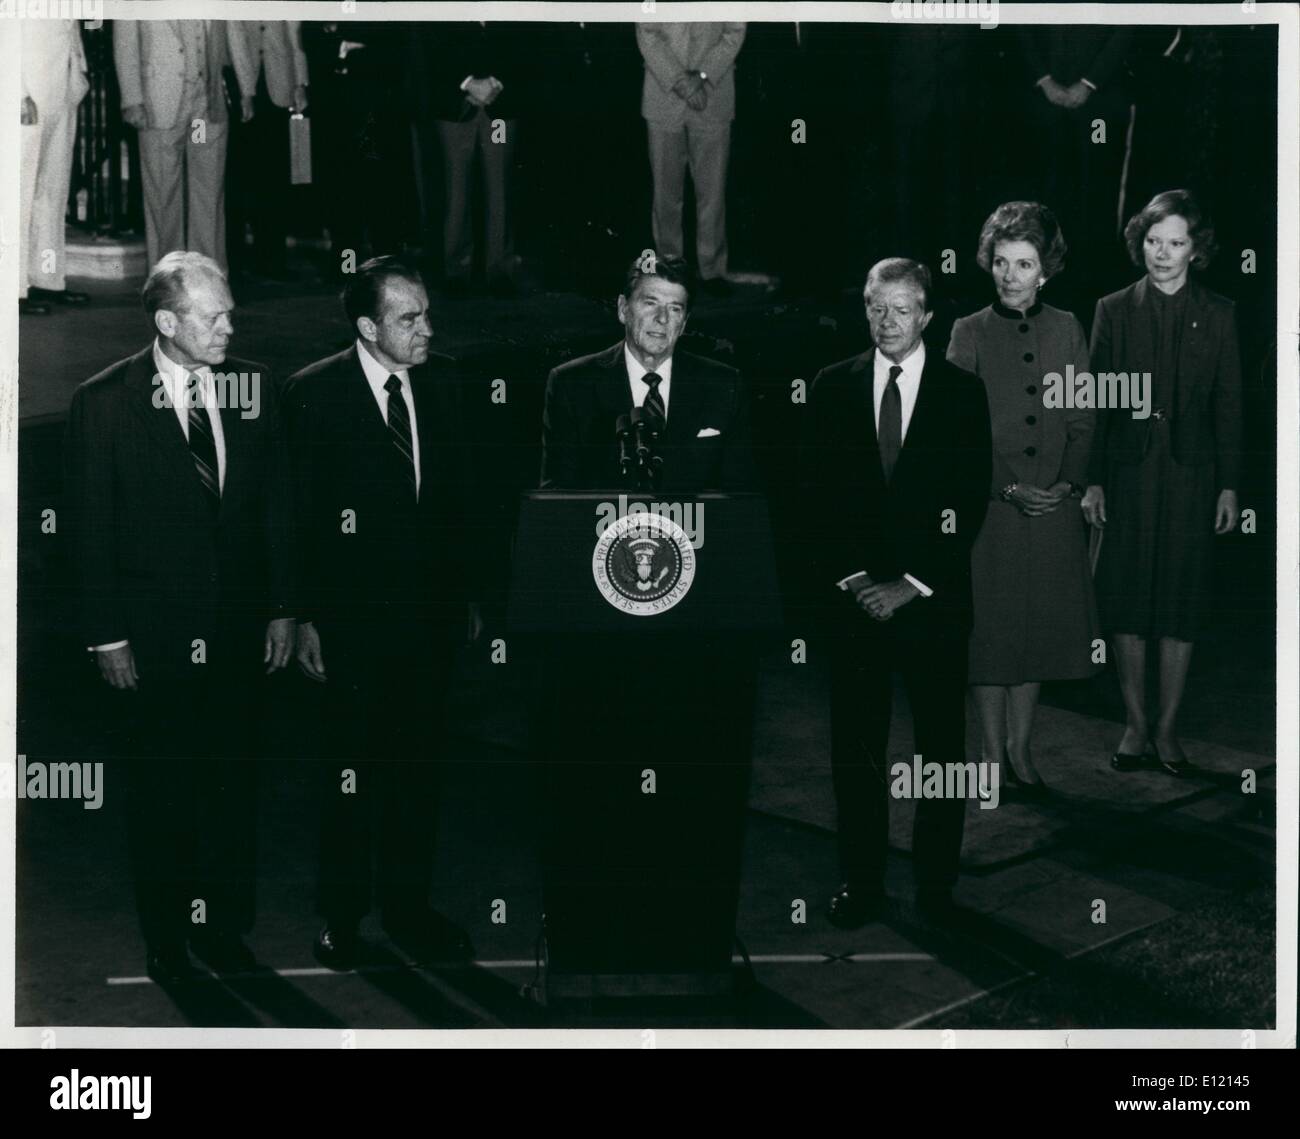 Oct 08, 1981 - Washington, District of Columbia, U.S. - President Ronald W.Reagan (at podium) as he addressed the nation to eulogize the late president Anwar Sadat of Egypt. Sadat was assassinated October 6th in Cairo while reviewing a parade. shown left to right in this historic picture are: Former president Gerald R. Ford; Former president Richard M. Nixon; (president Reagan); And former president Jimmy Carter. At right are Mrs.Jimmy Carter and Mrs.Ronald Reagan. The four men will be part of the U.S. Delegation attending the funeral for the slain leader. Stock Photo